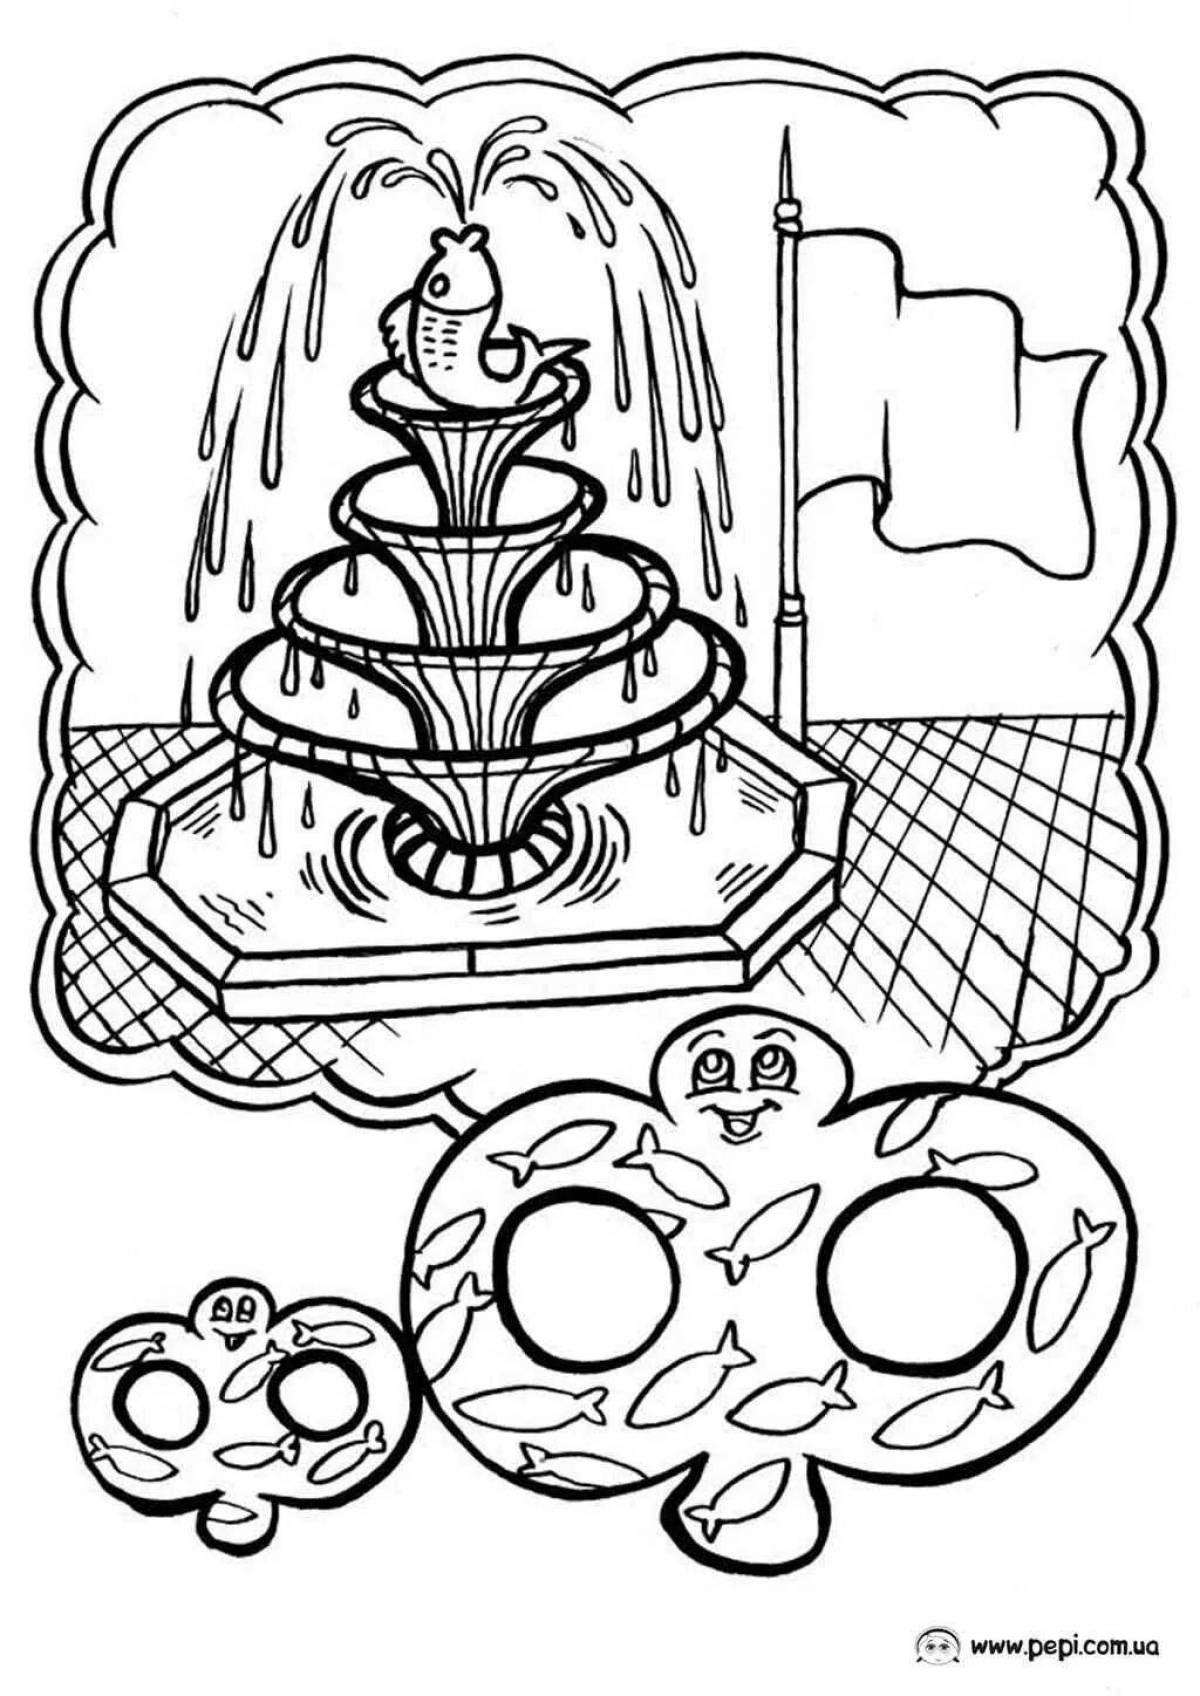 Adorable fountain coloring page for kids